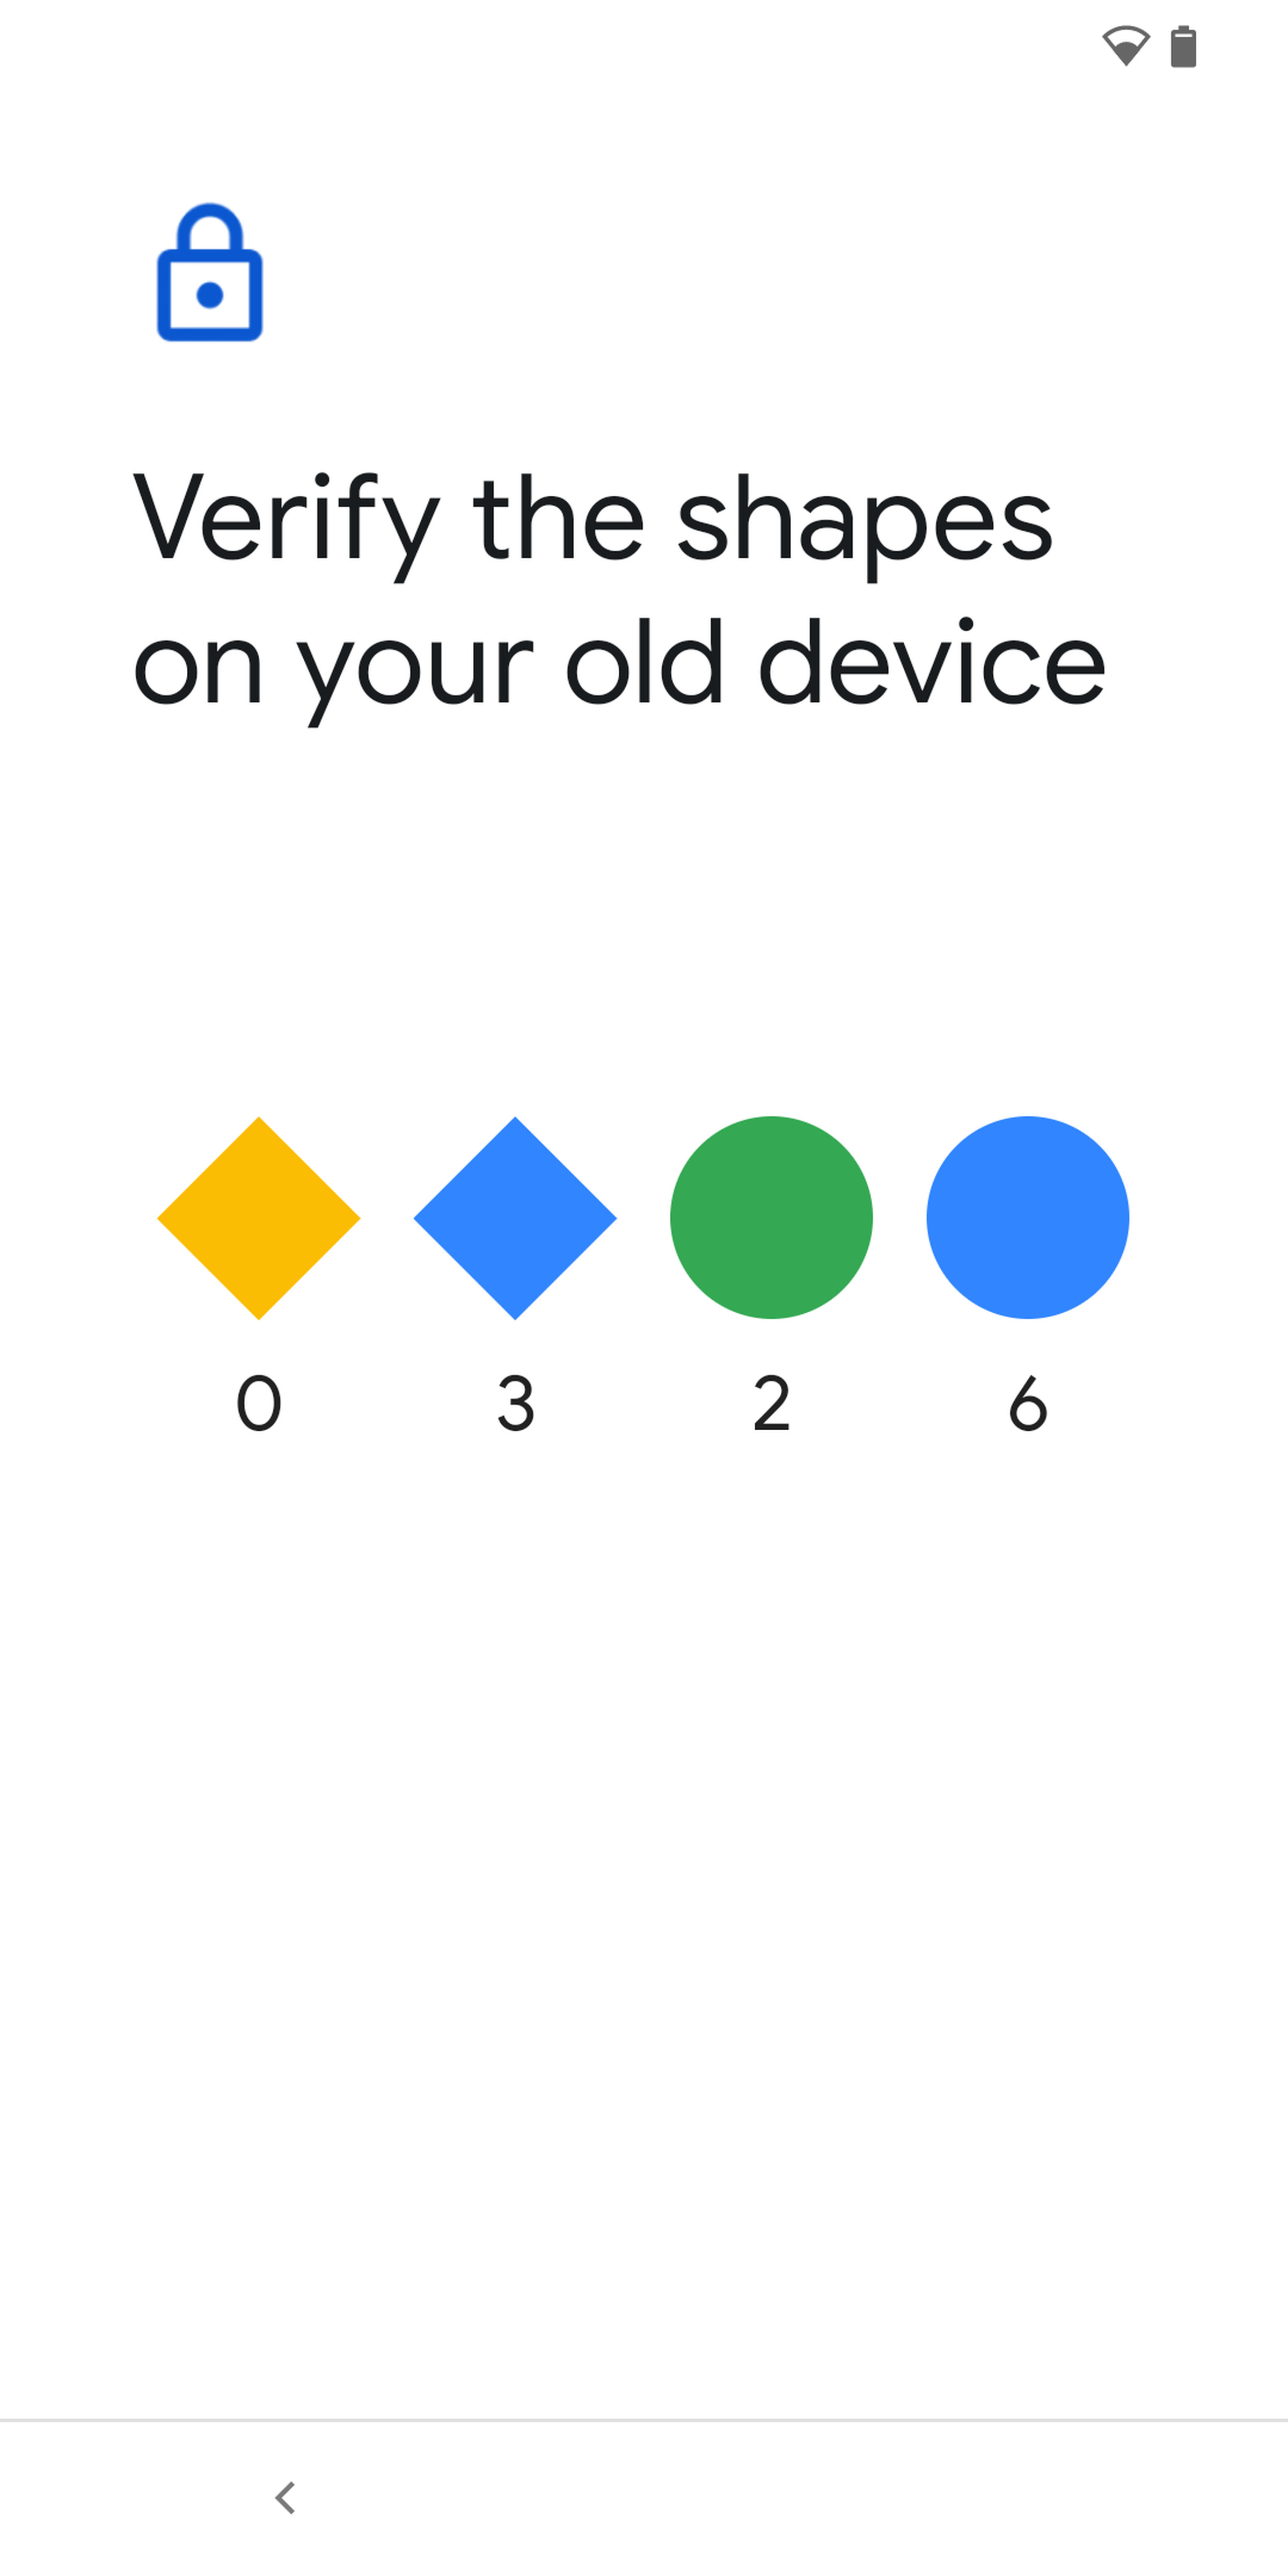 Page: Verify the shapes on your old device